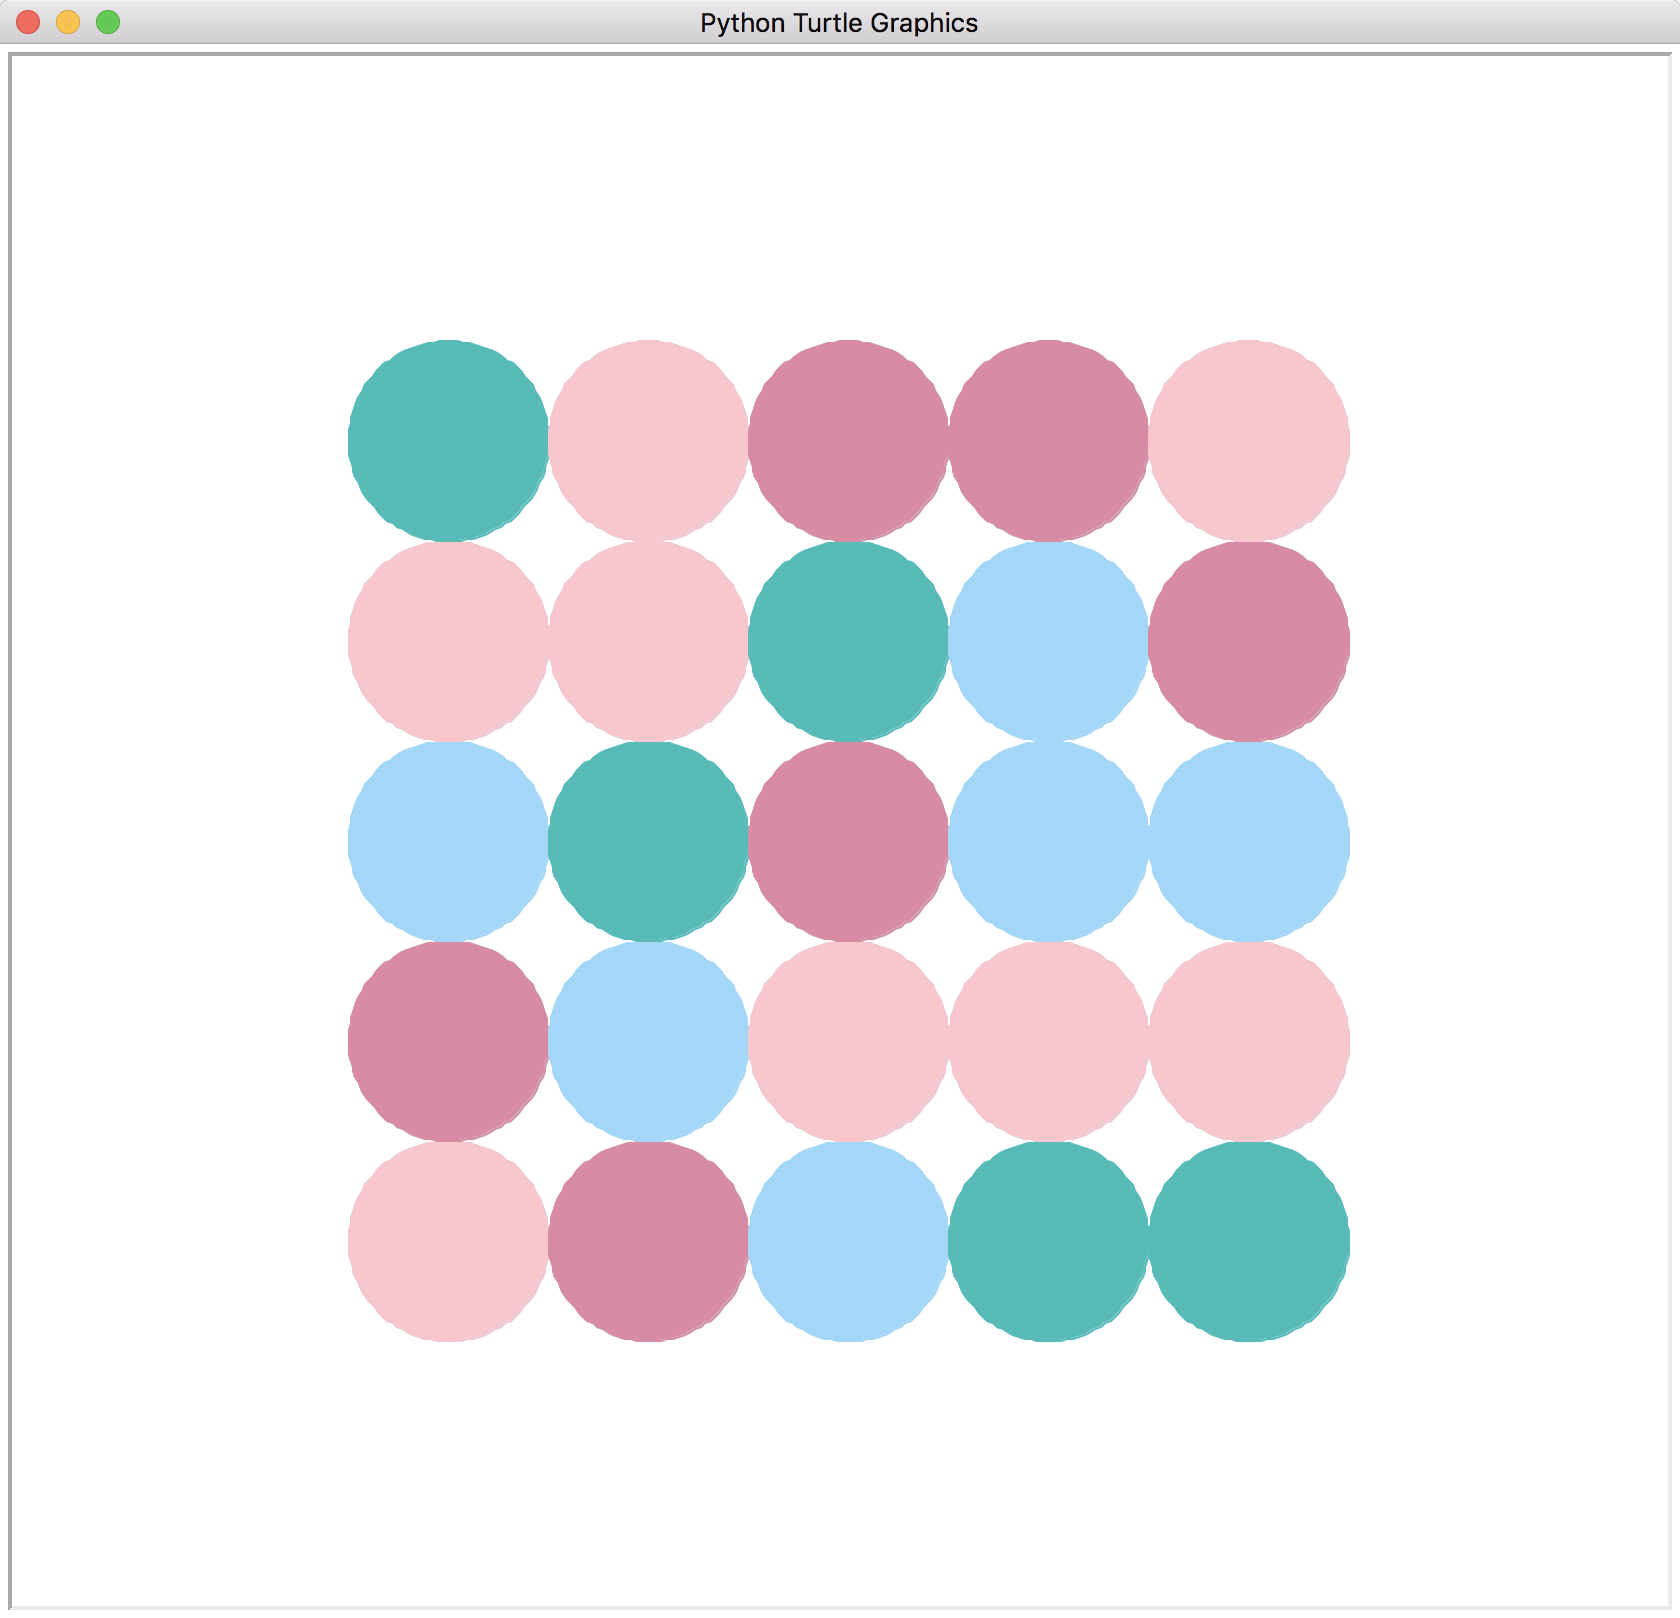 Turtle graphics display of a 5x5 grid of circles with random colors